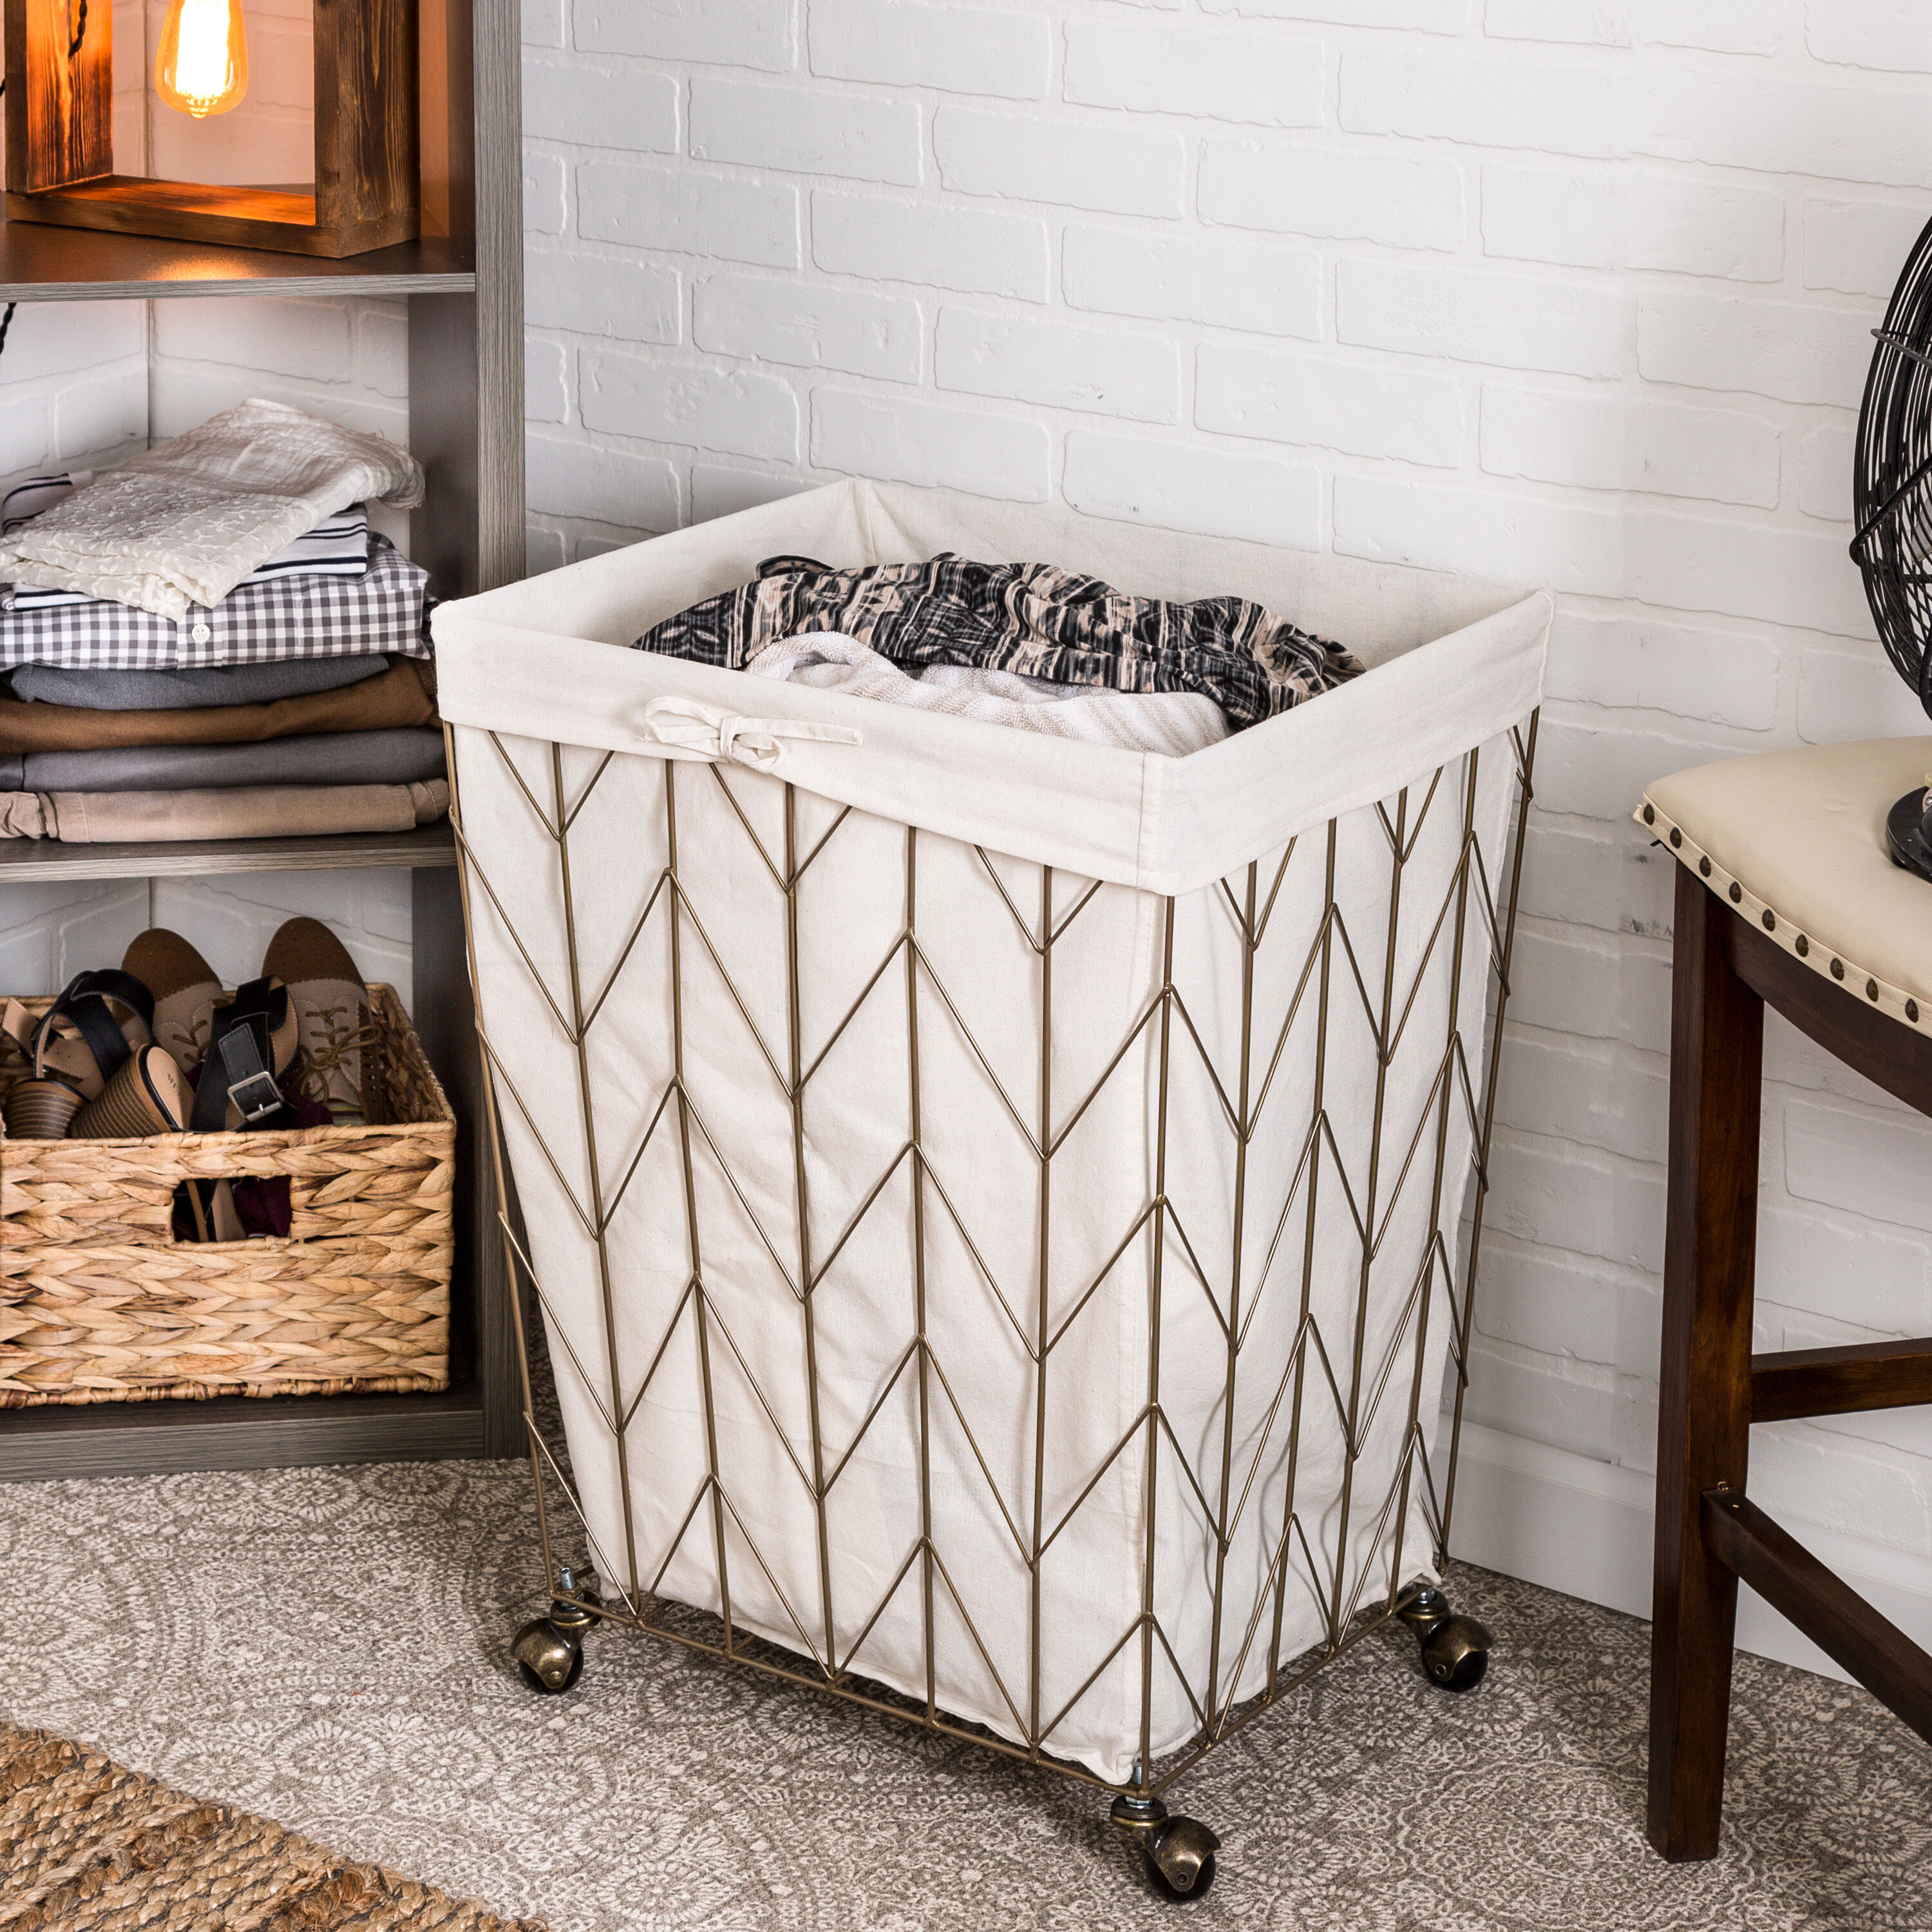 Add wheels to a metal trash can to be used as a clothes hamper